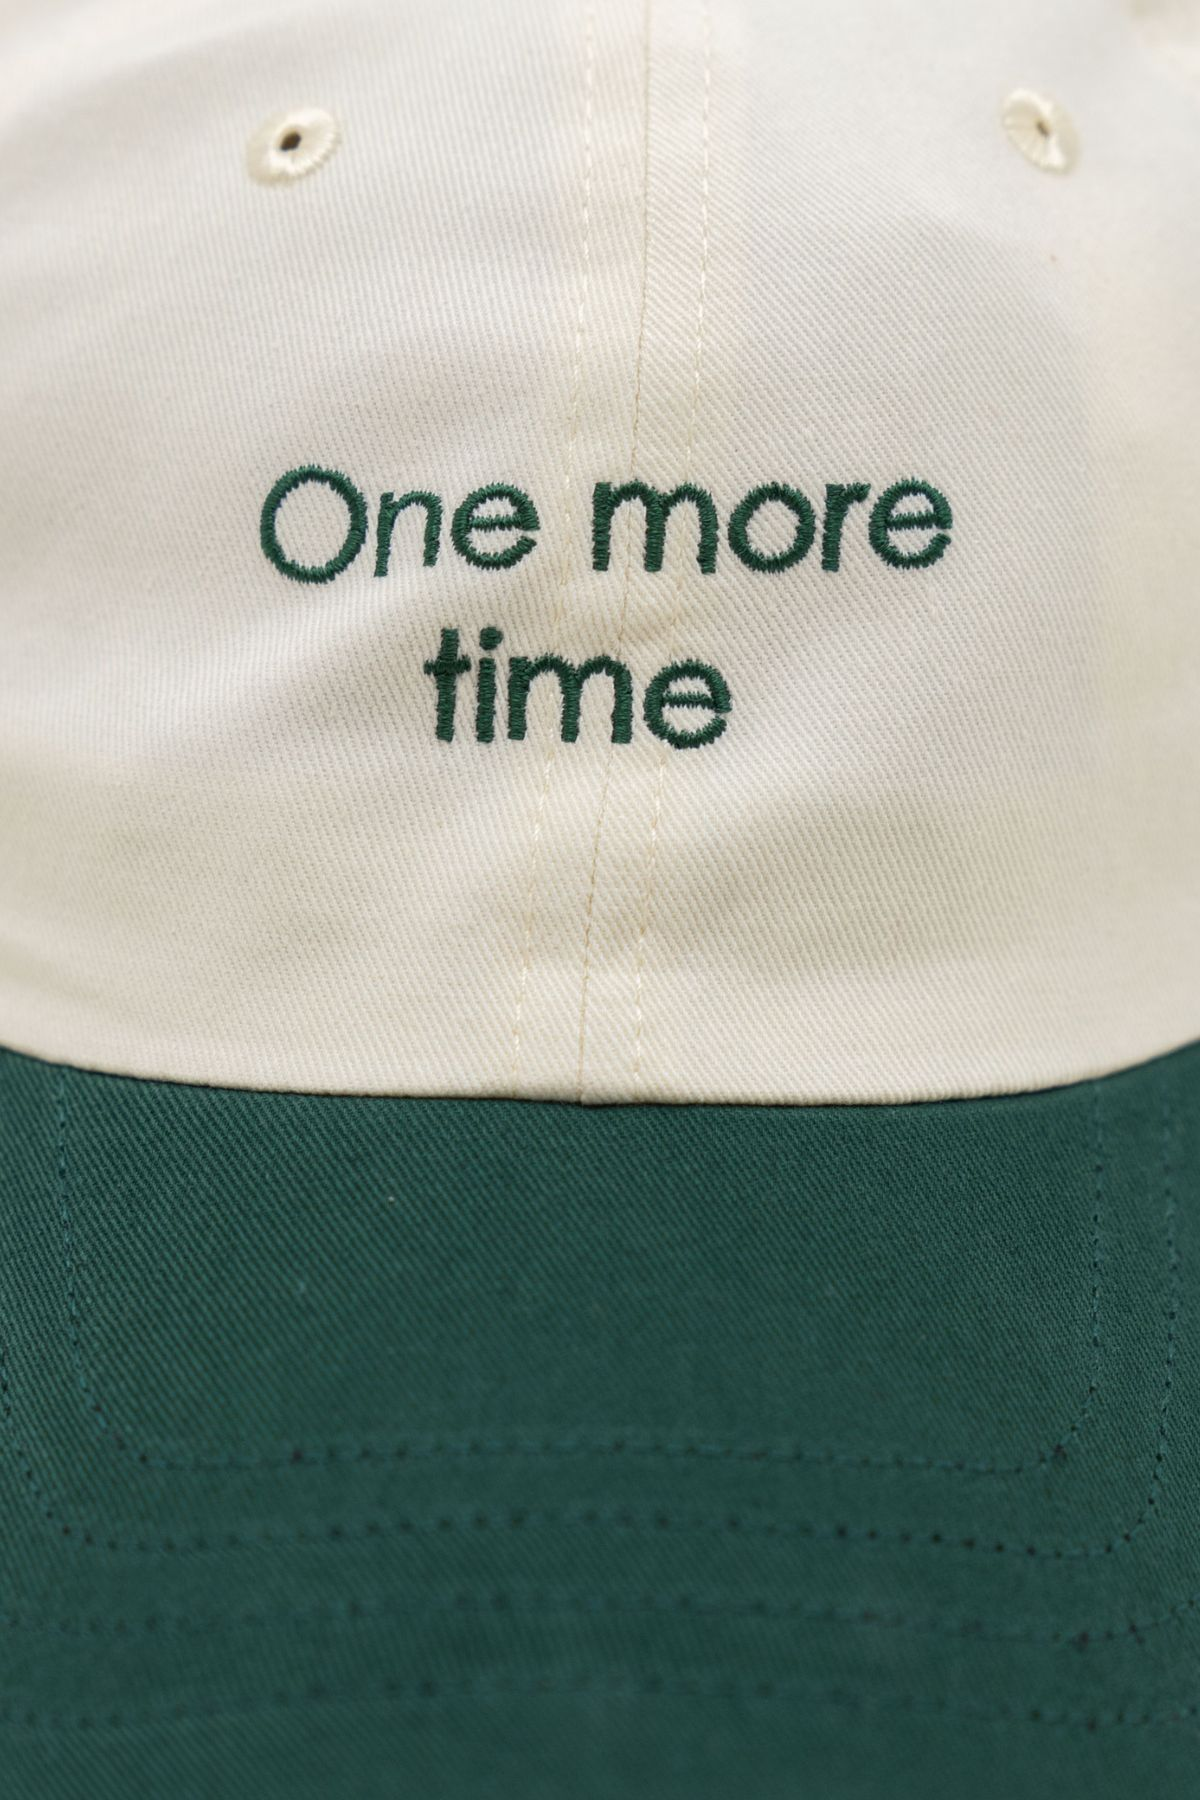 Casquette One more time - Jam